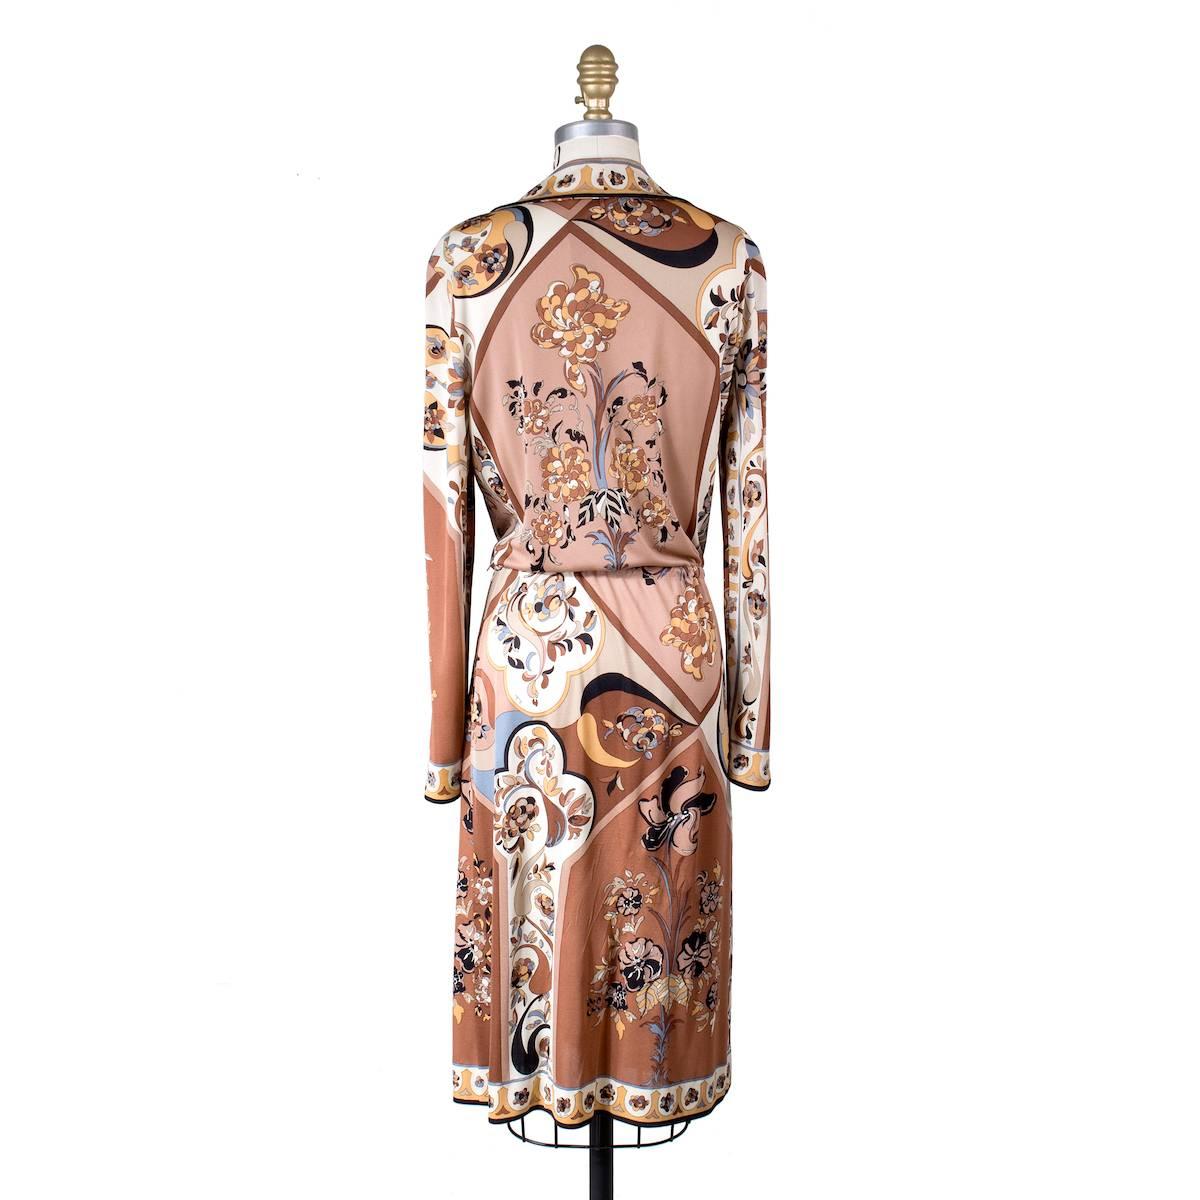 This is a vintage Pucci dress circa 1970s.  It features a signature Pucci print in brown and has a drawstring waist to cinch.  